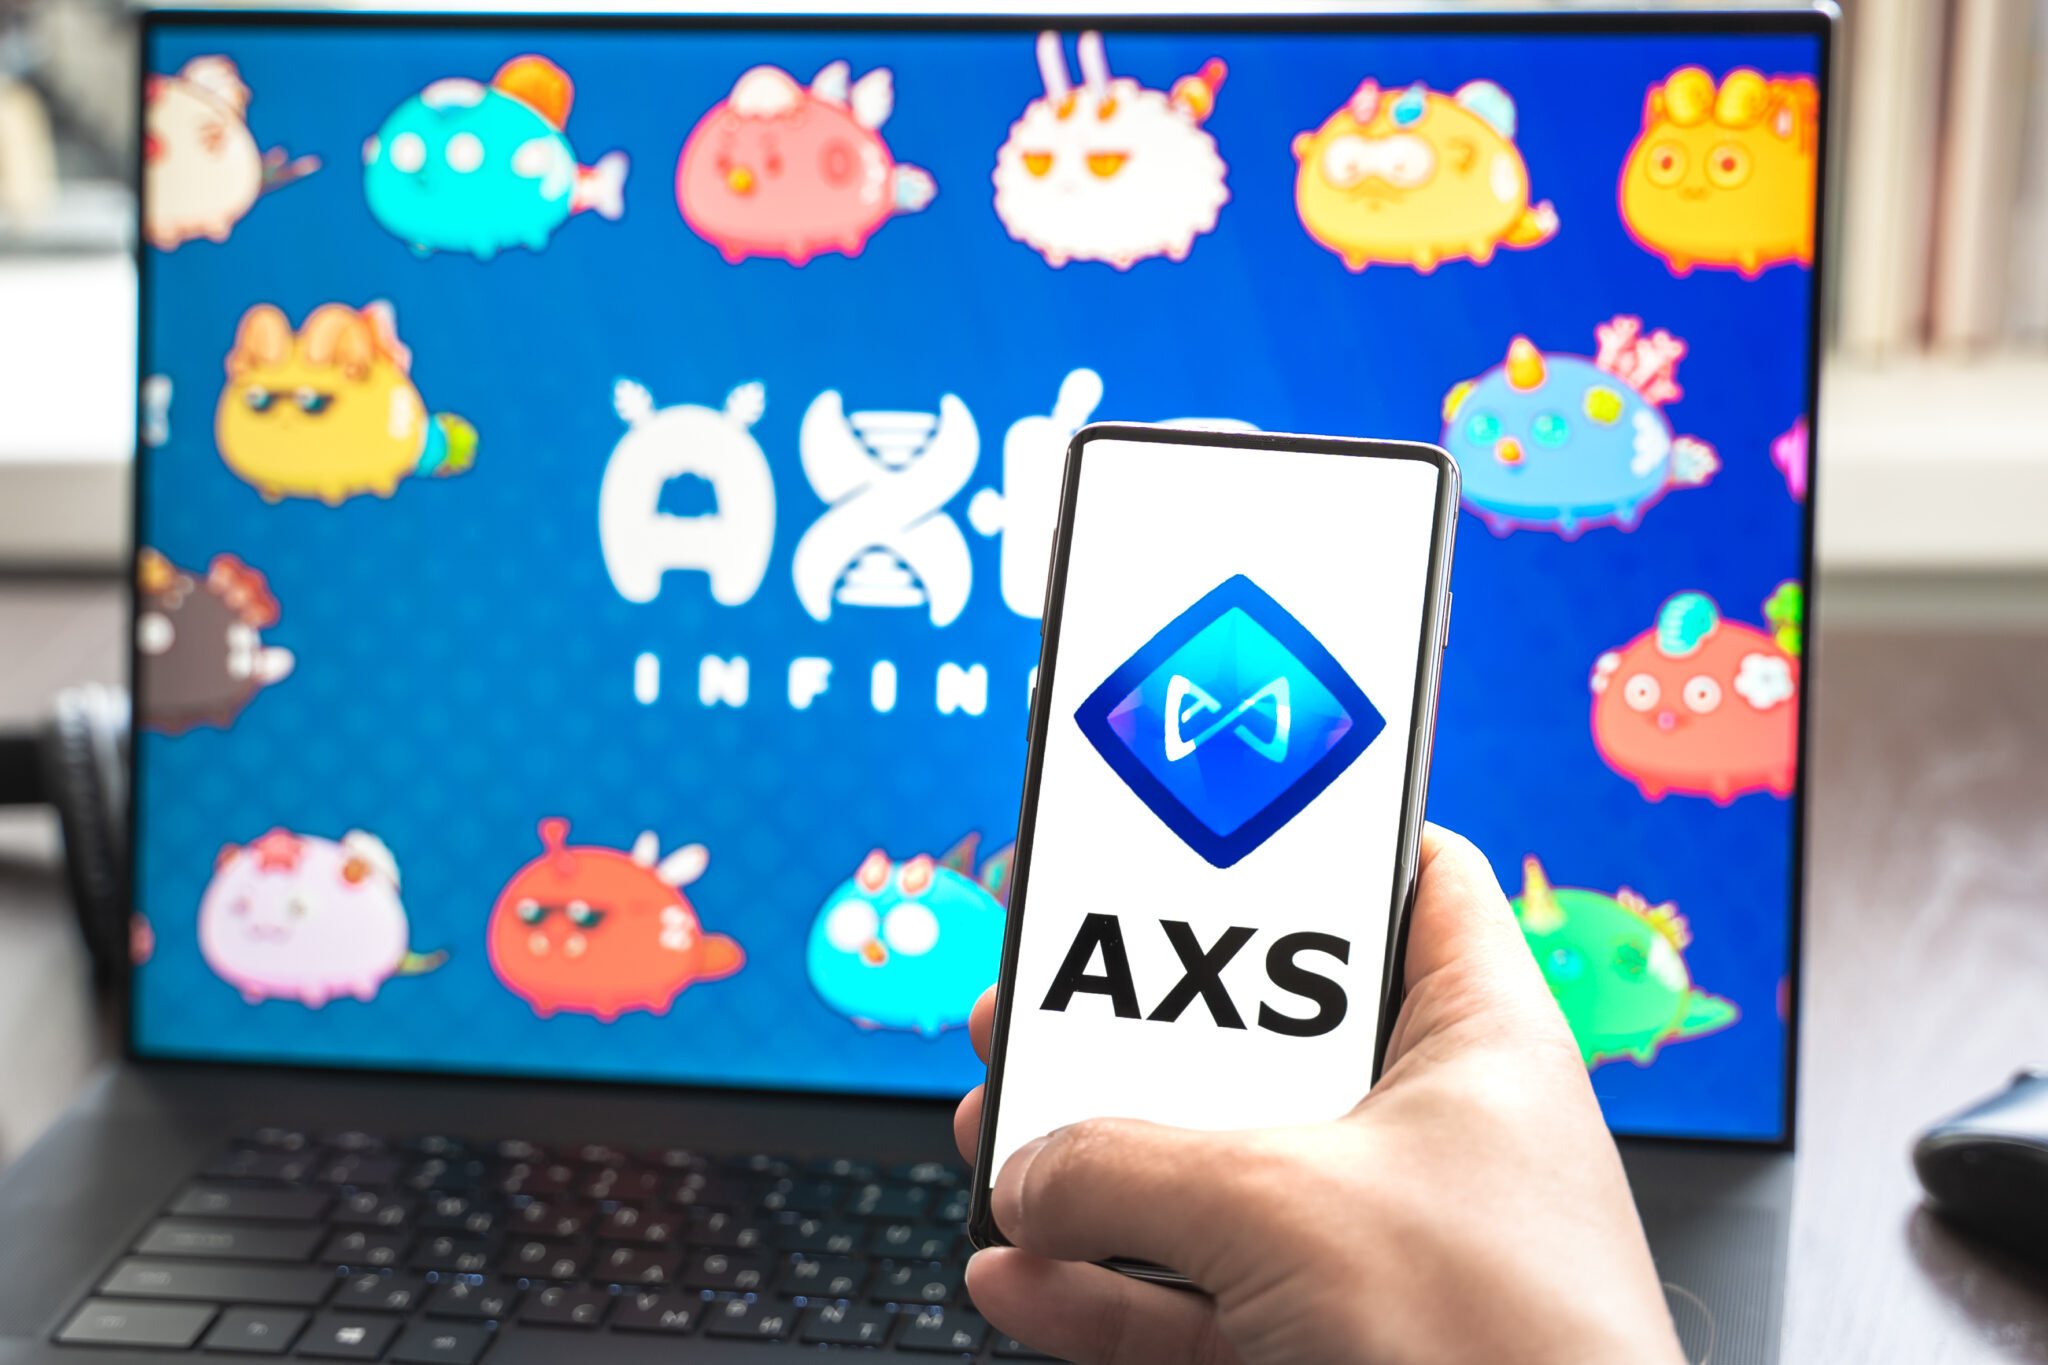 Russia Moscow 30.05.2021.Logo,screenshot of blockchain nft ethereum cryptocurrency game Axie in laptop,mobile phone.Man playing,collecting,creating crypto pet,heroes. Earning digital money tokens AXS.